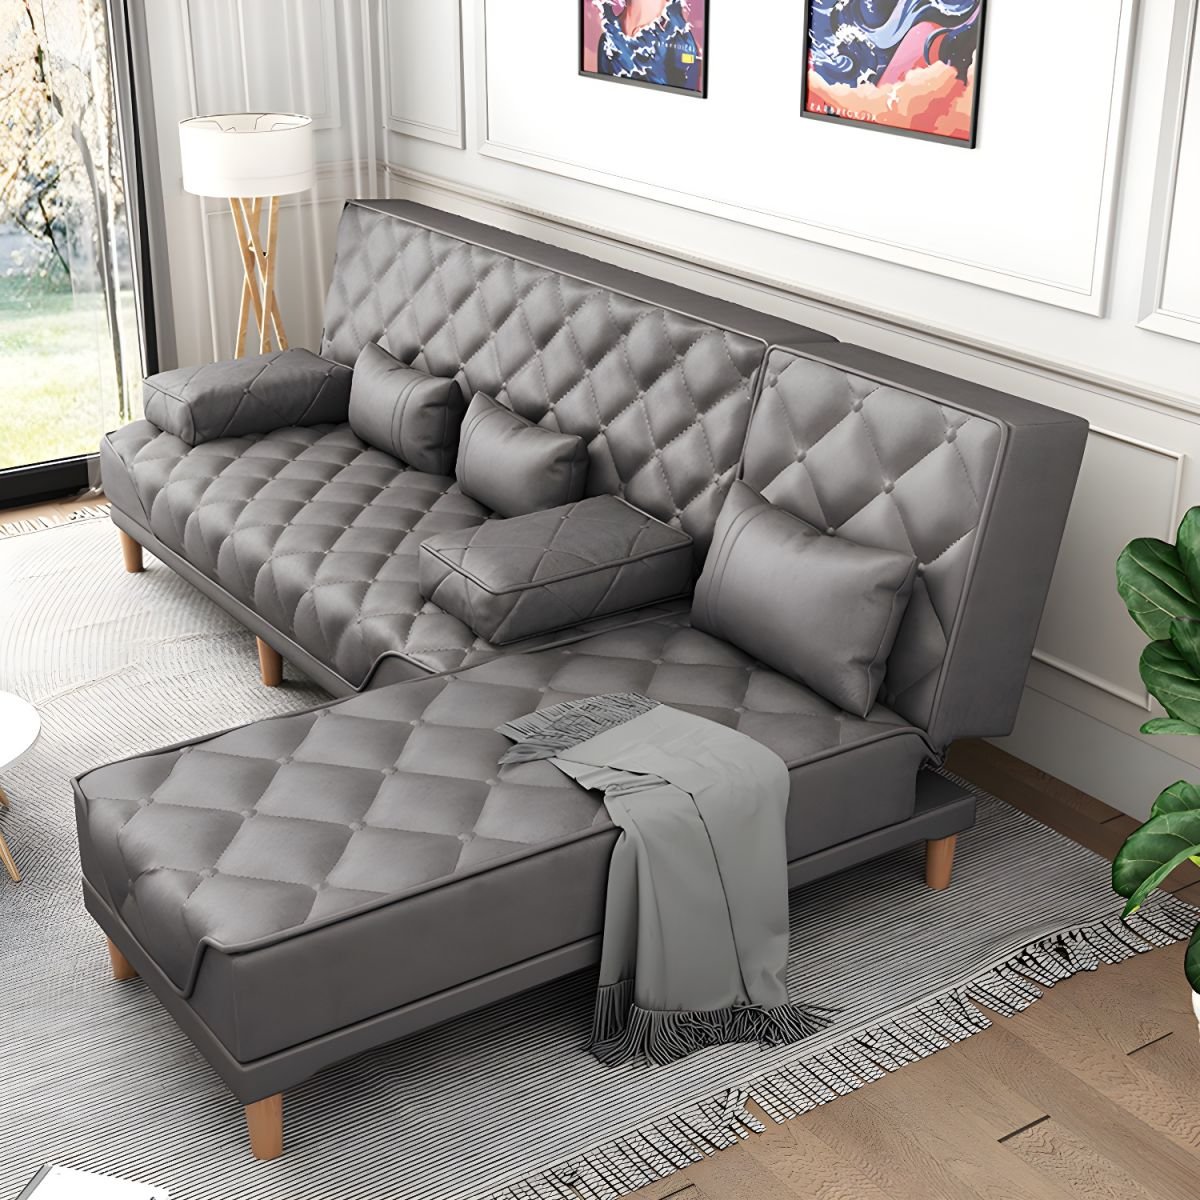 Contemporary Tight Back Convertible Sofa and Chaise with Pillow Top Arm - 96"L x 57"W x 34"H Dark Gray Tech Cloth